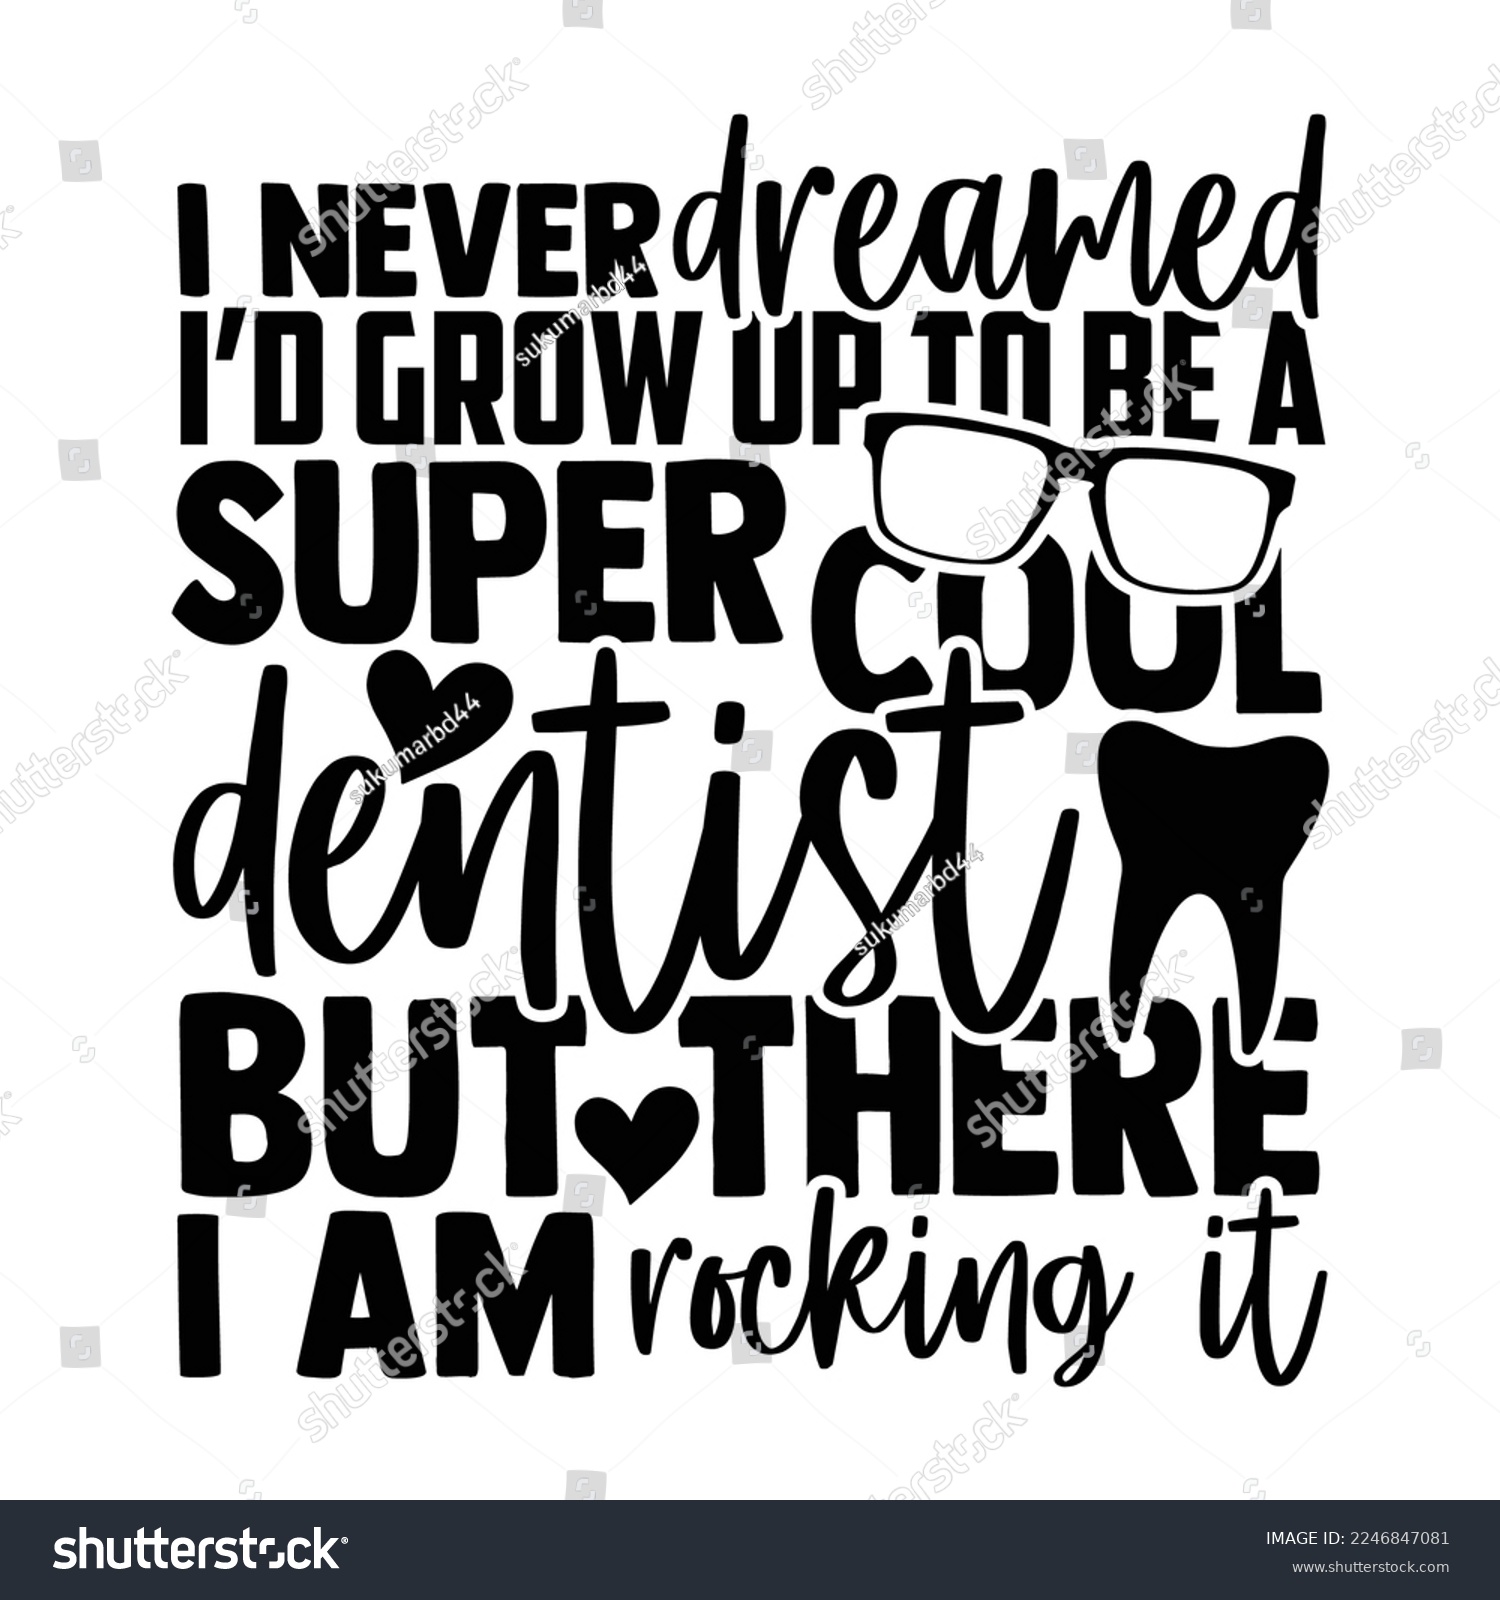 SVG of I Never Dreamed I’d Grow Up To Be A Super Cool Dentist But There I Am Rocking It - Dentist T-shirt Design, Conceptual handwritten phrase svg calligraphic, Hand drawn lettering phrase isolated on white svg